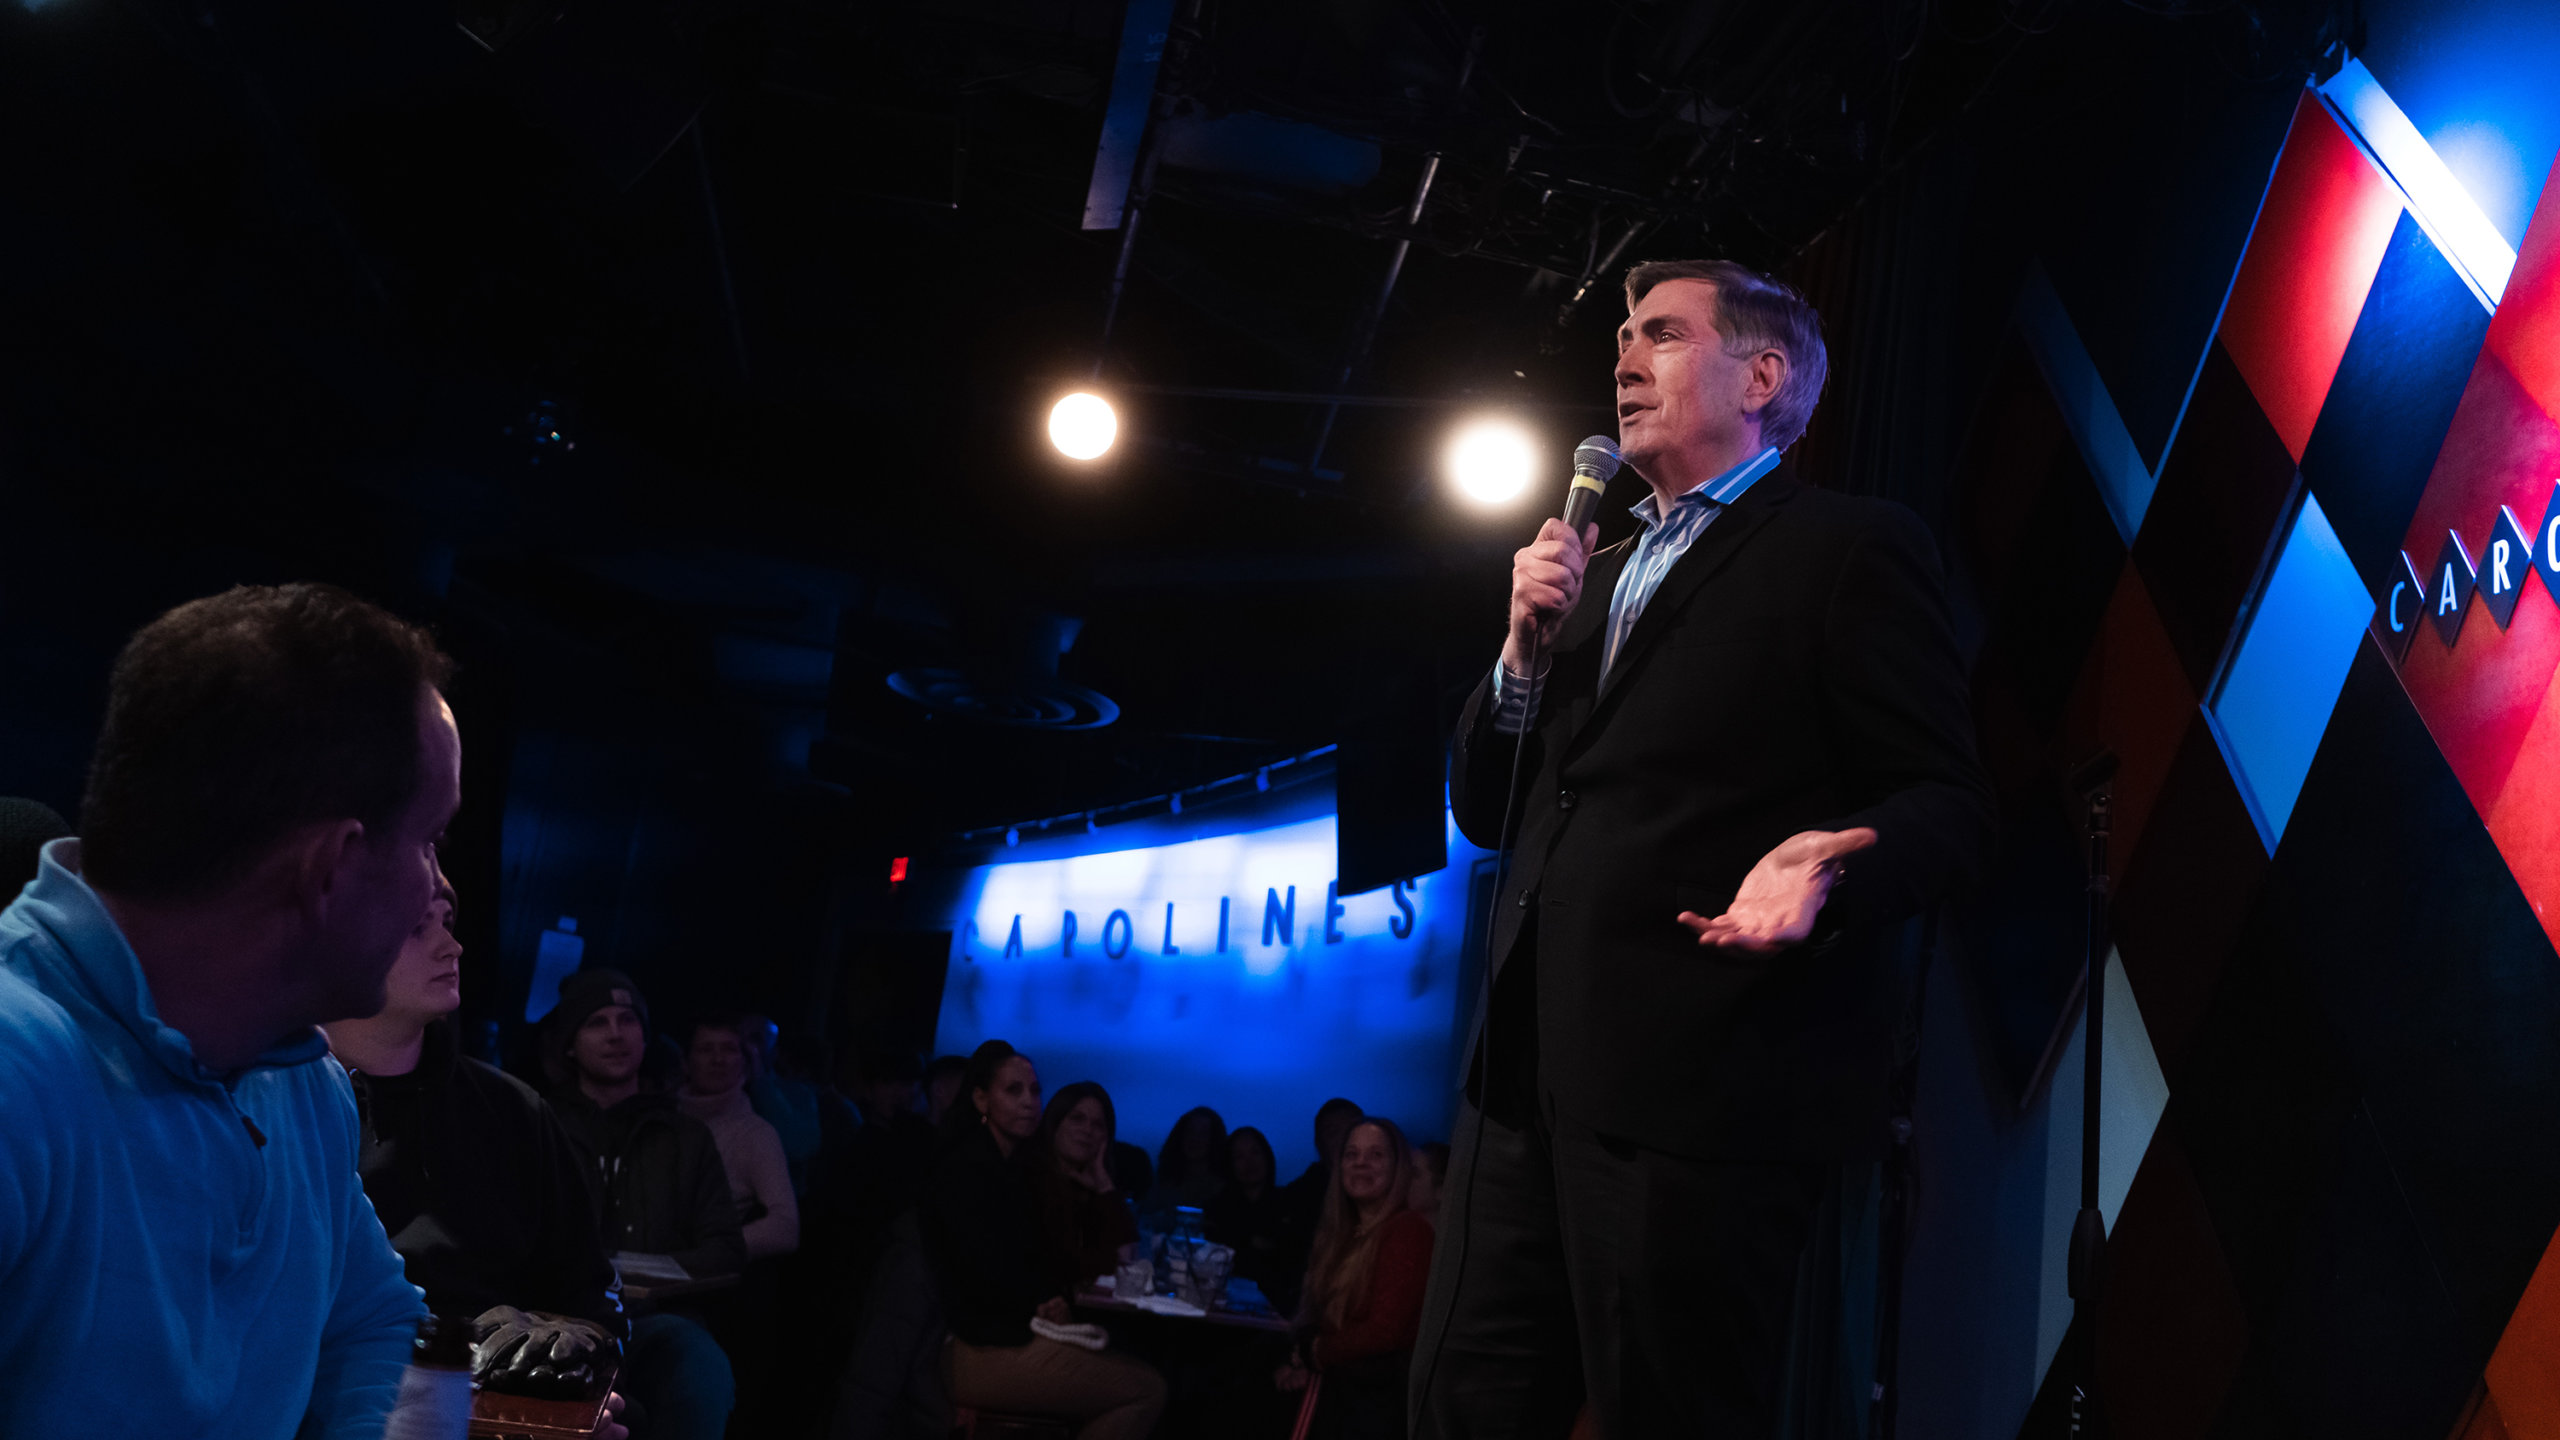 Bill McCuddy performs one last time at Carolines on Broadway